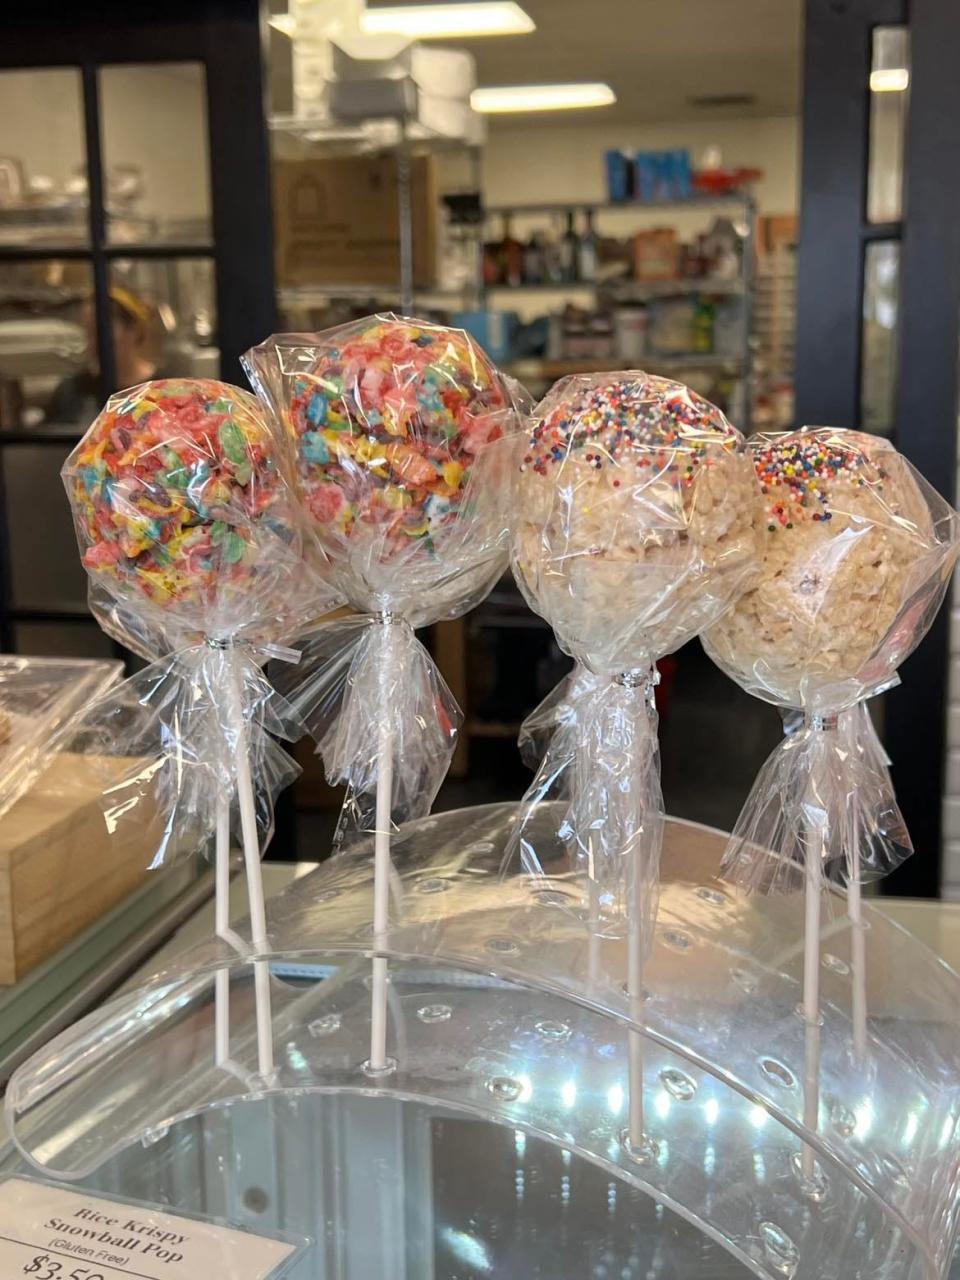 Rice Krispies pops are among the sweet treats featured at Stuffed Pastry, a newer bakery on South Main Street in North Canton near Variety's Restaurant.